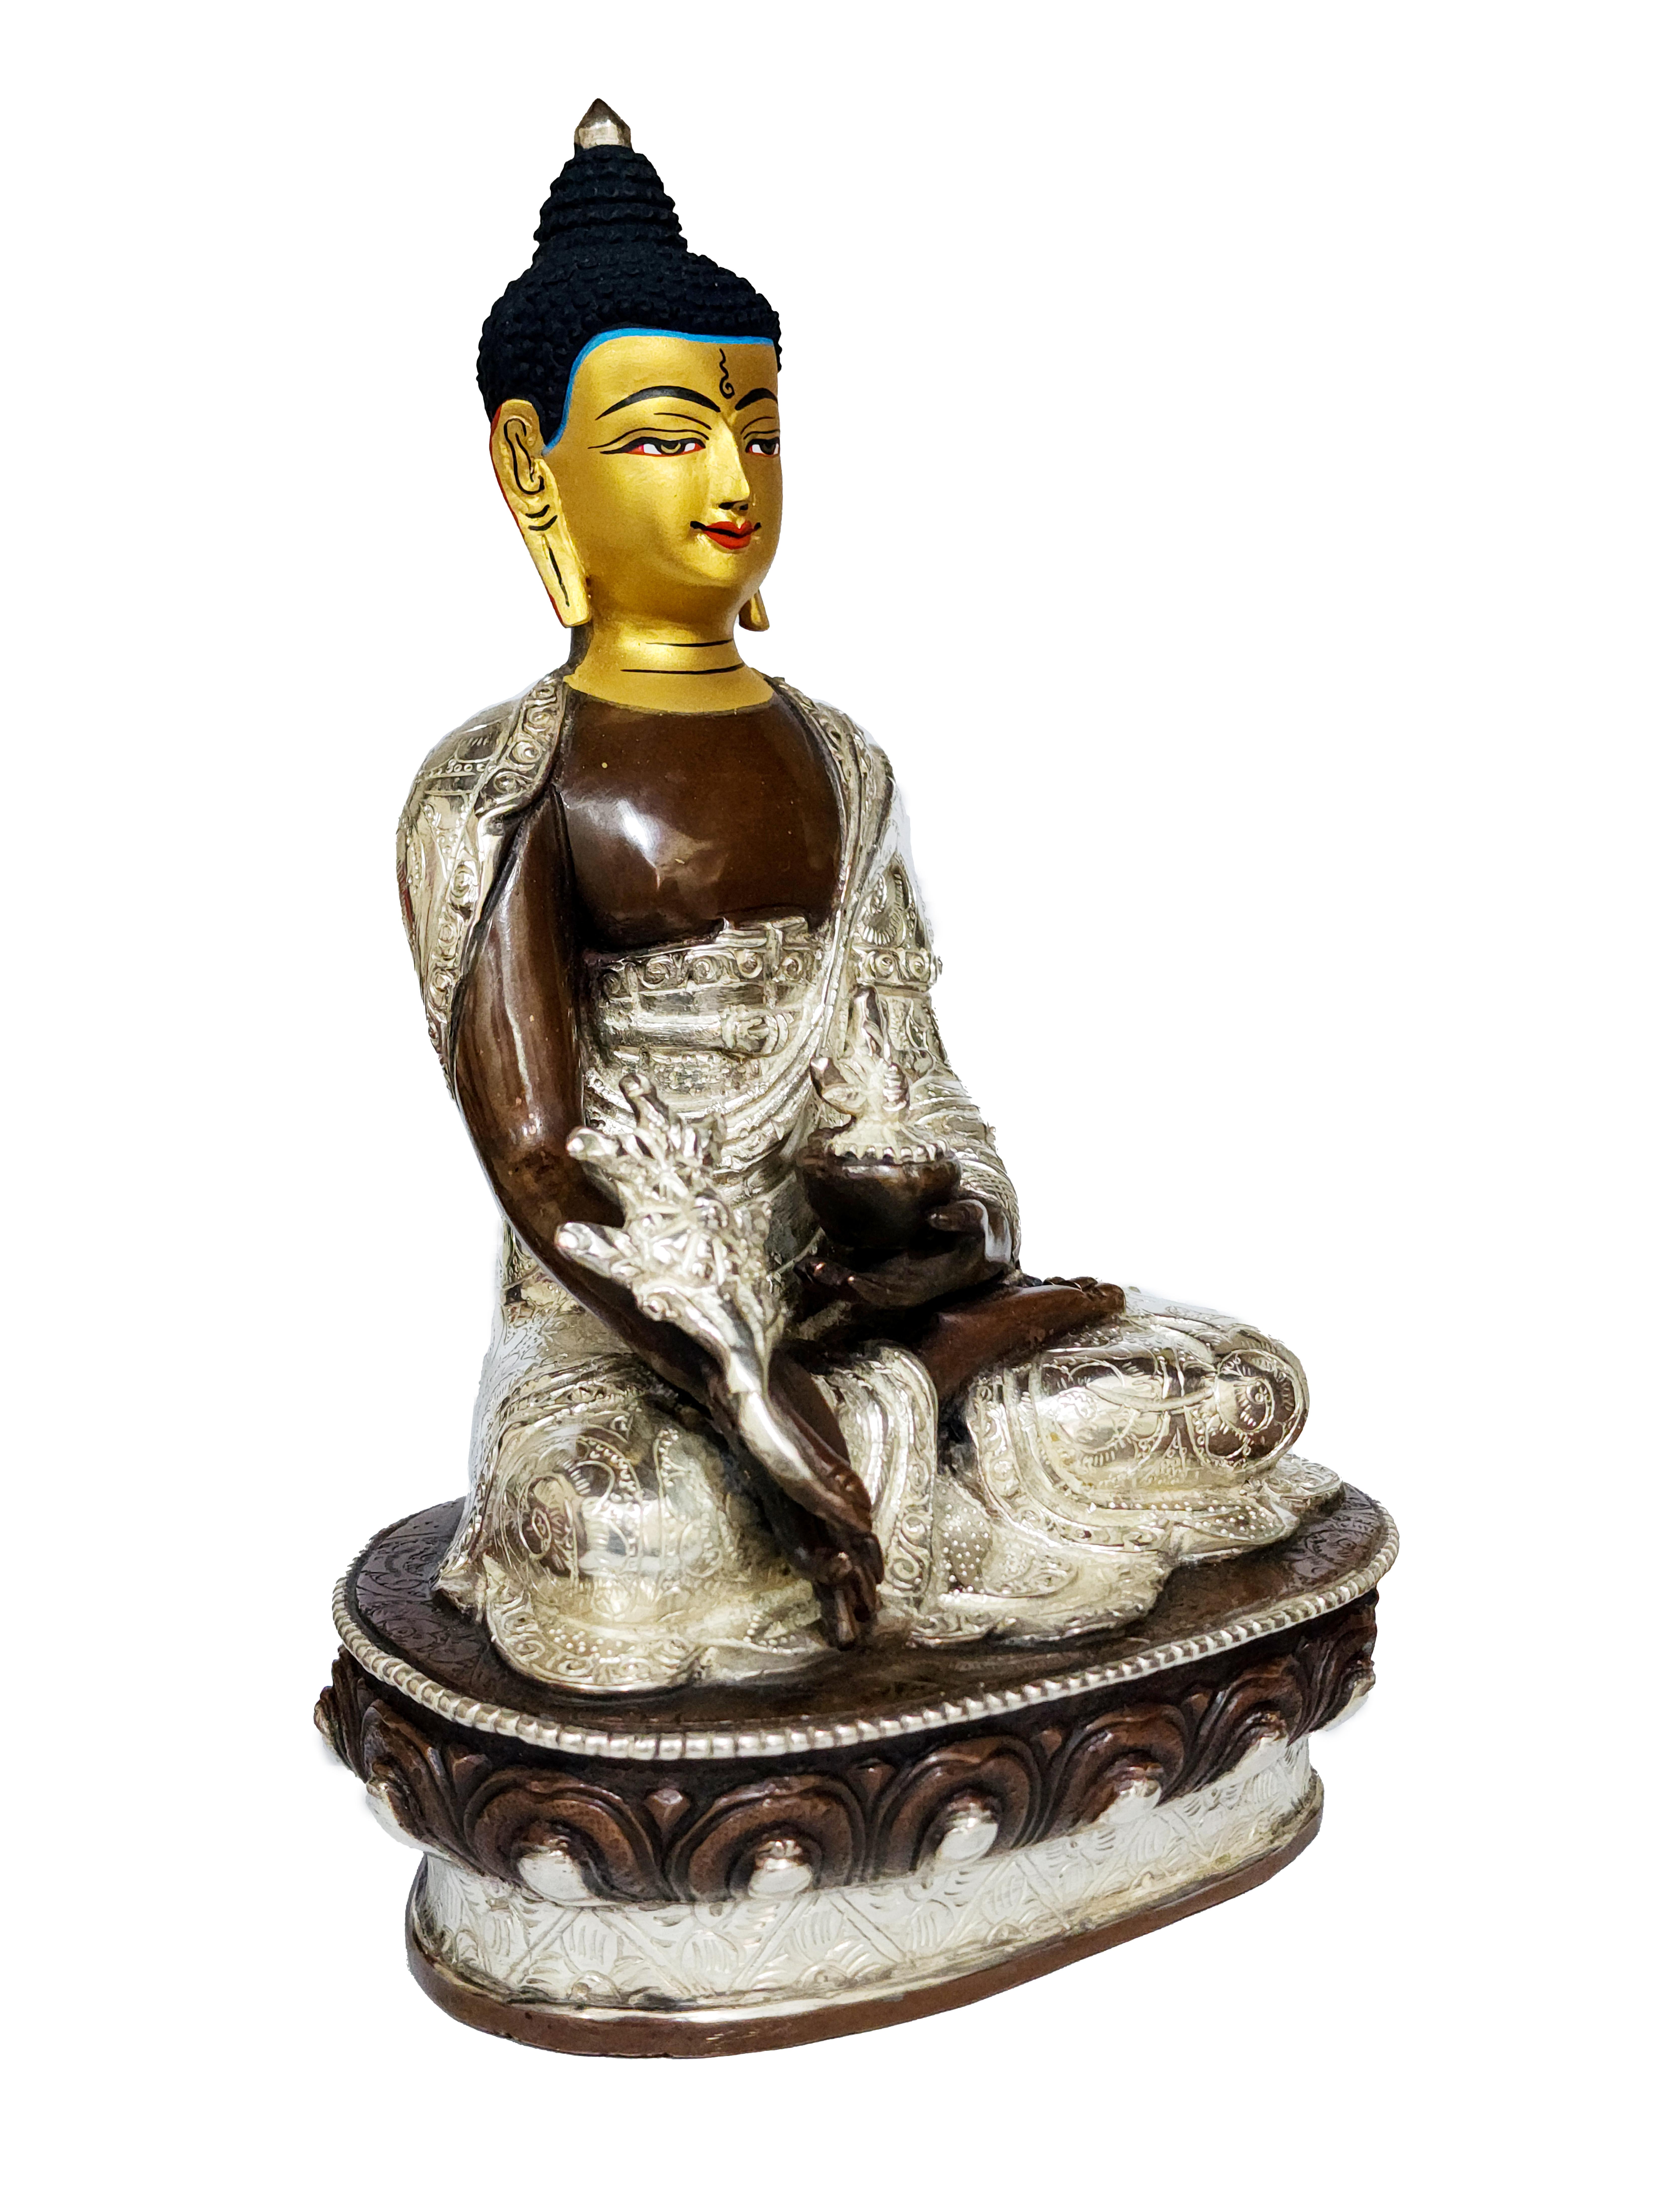 medicine Buddha Buddhist Handmade Statue, silver And Chocolate Oxidized, Wtih face Painted